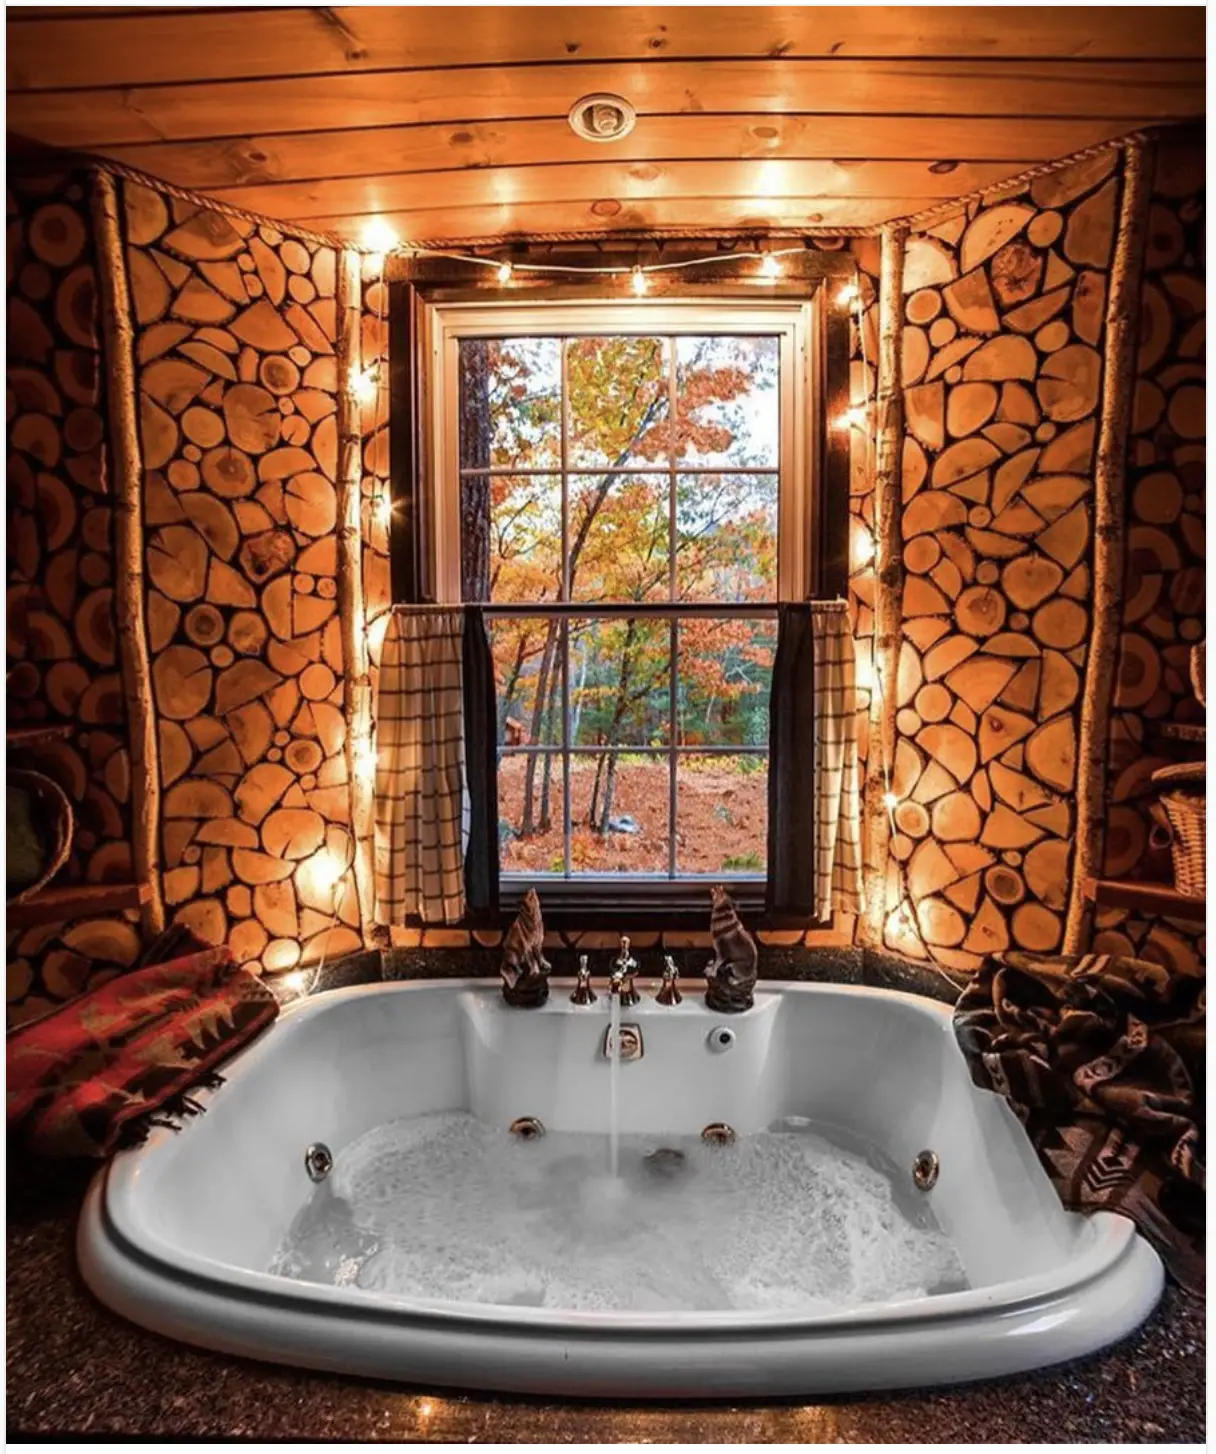 Hotels With Jacuzzi Tub In Room With View Near Boston